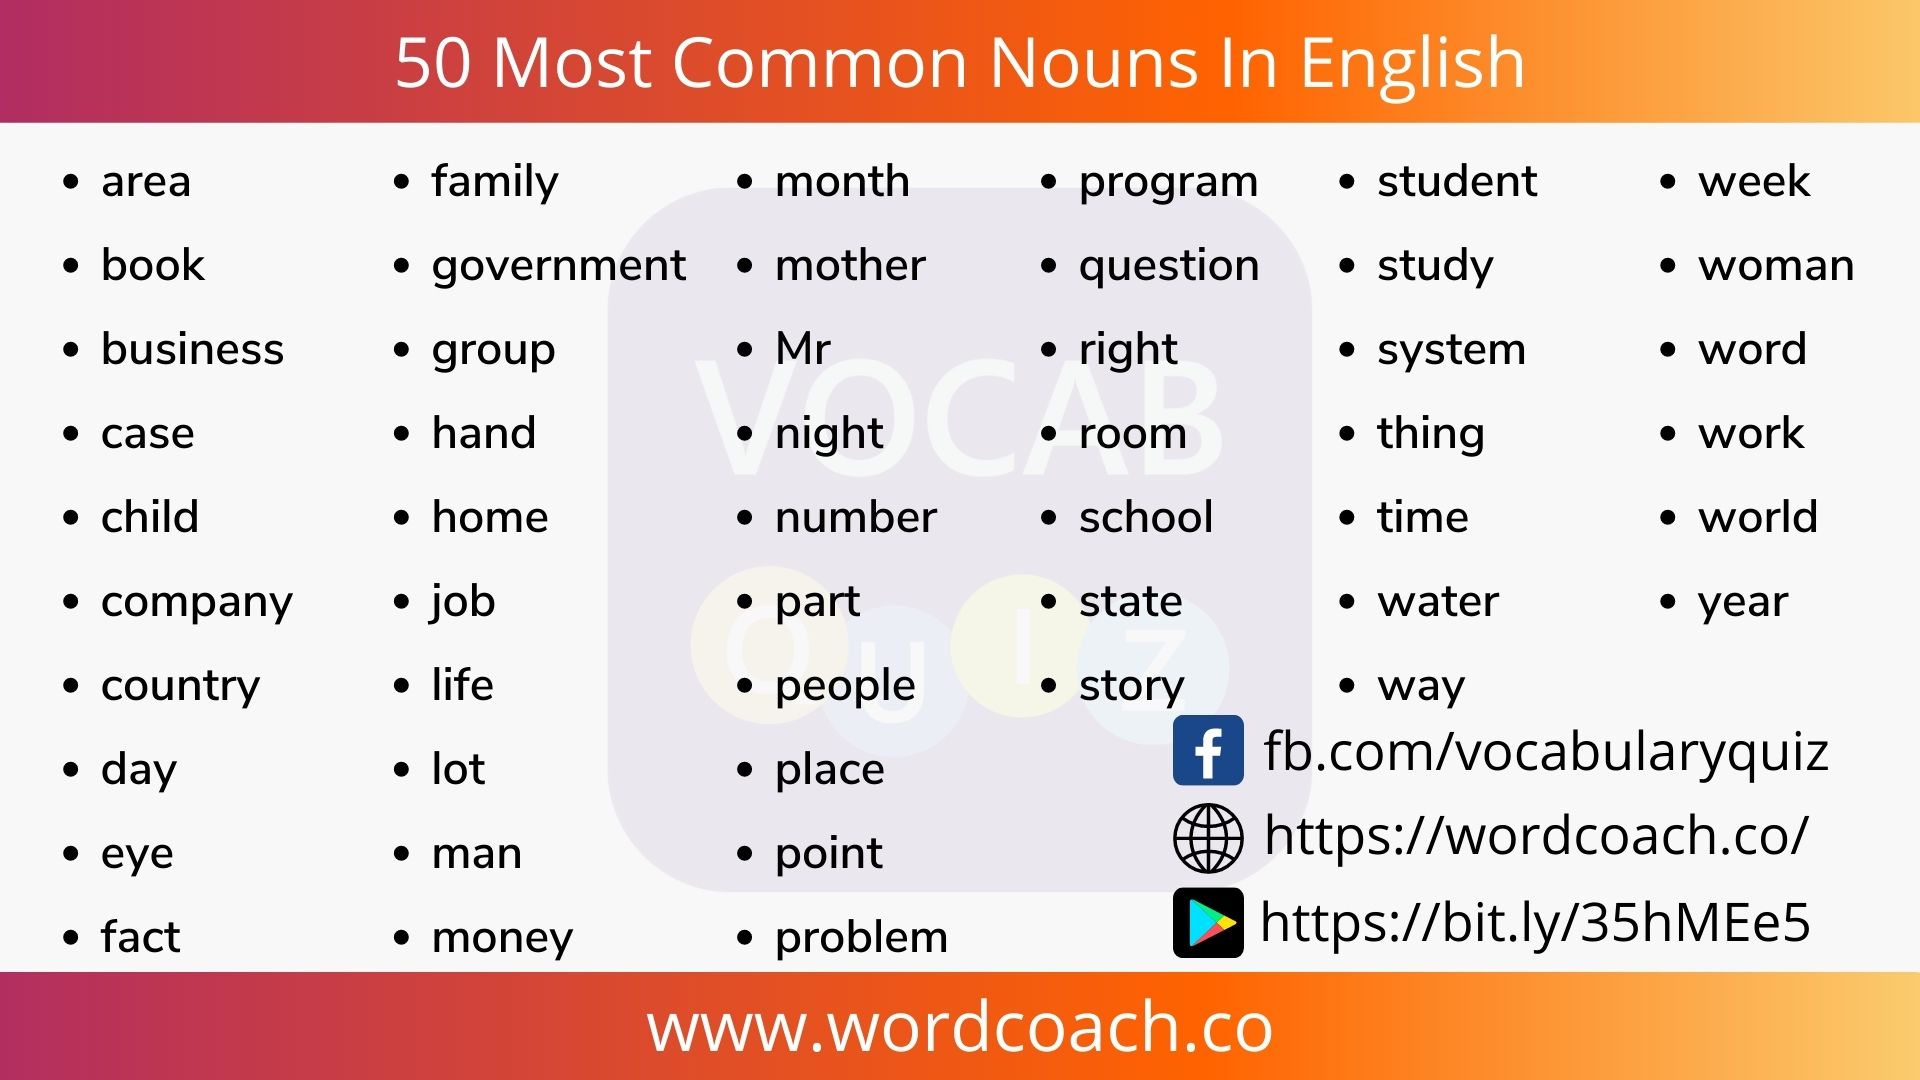 50 Most Common Nouns In English - wordcoach.co